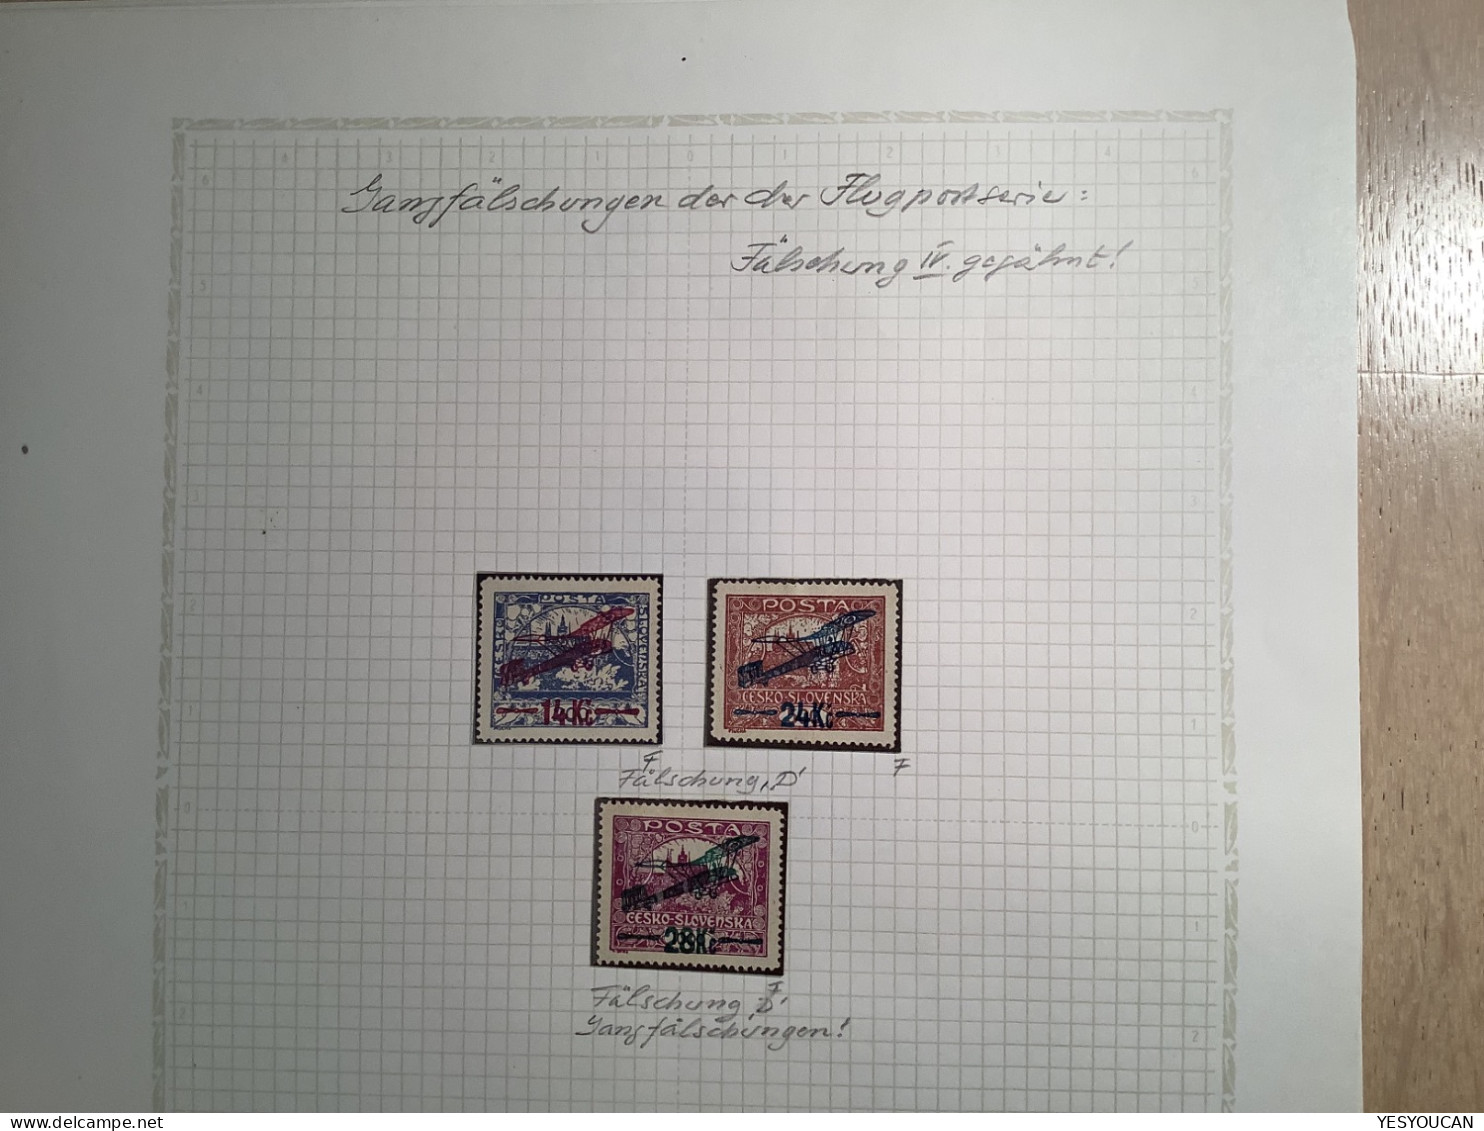 Czechoslovakia air post stamps 1920 superb specialised forgery collection, 67 stamps (Flugpost Fälschungen Faux